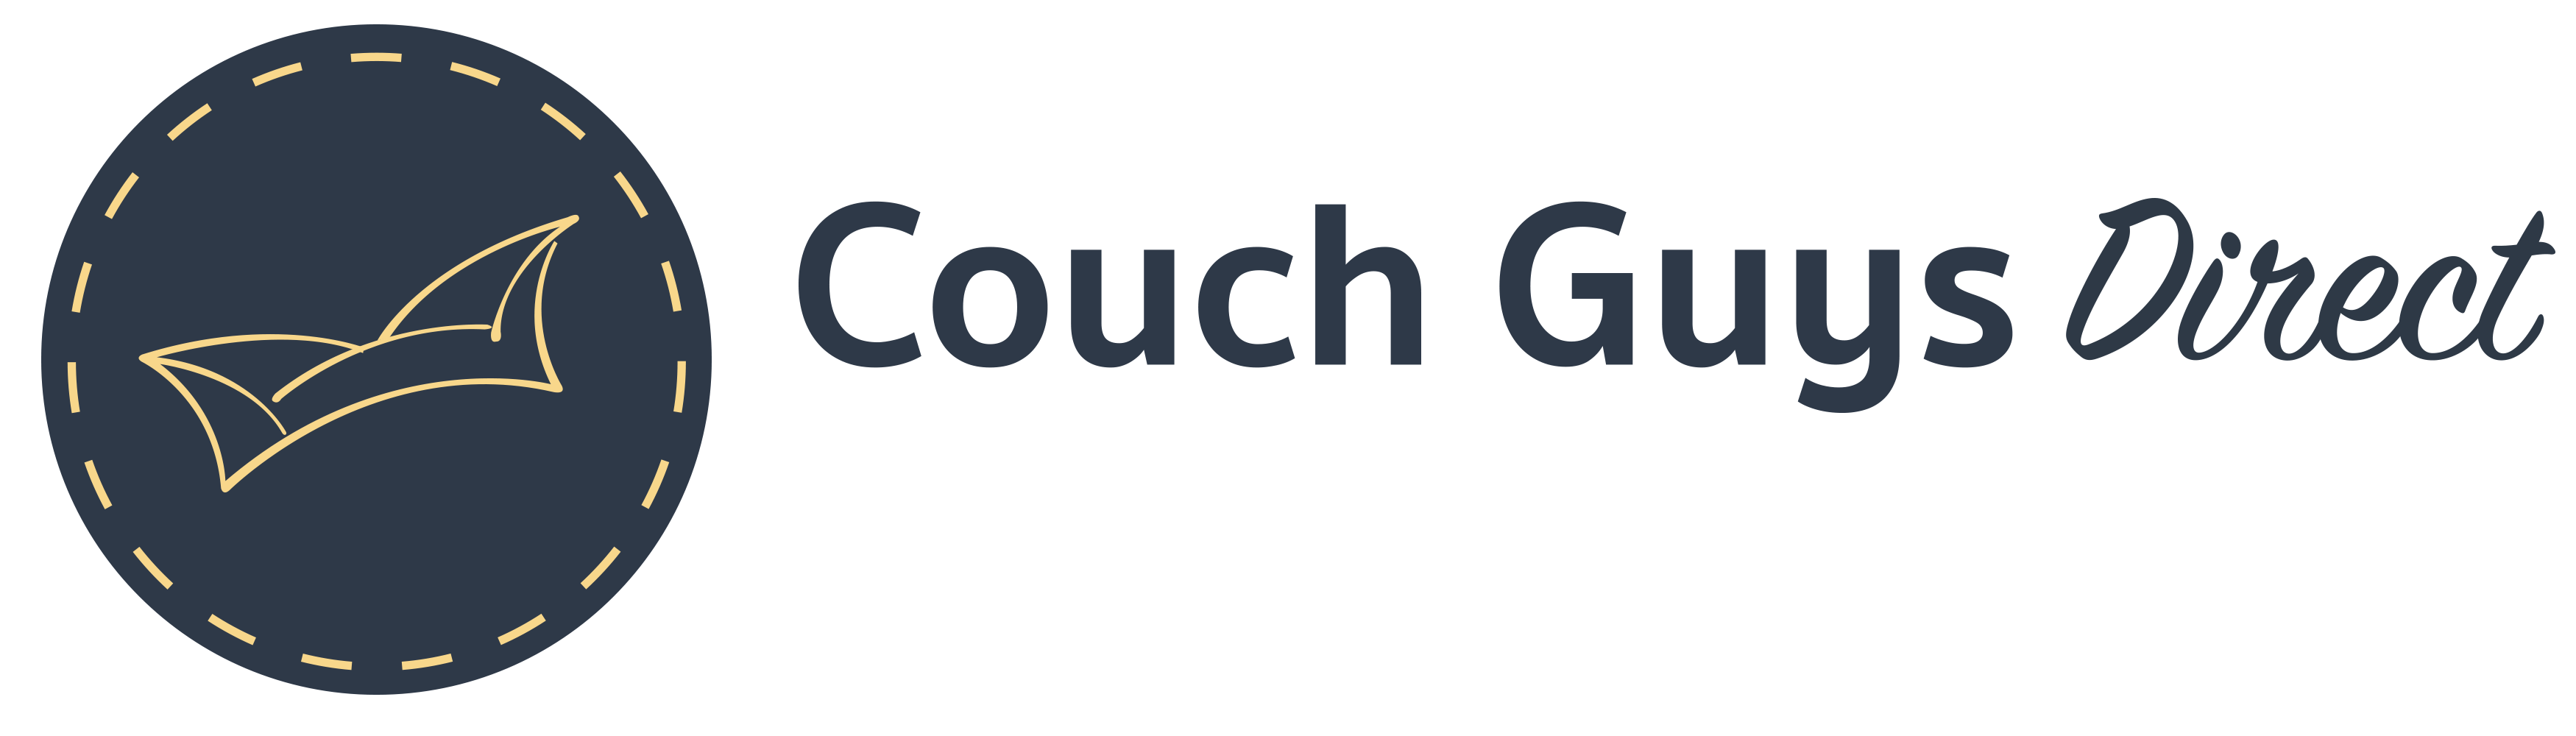 Couch Guys Direct